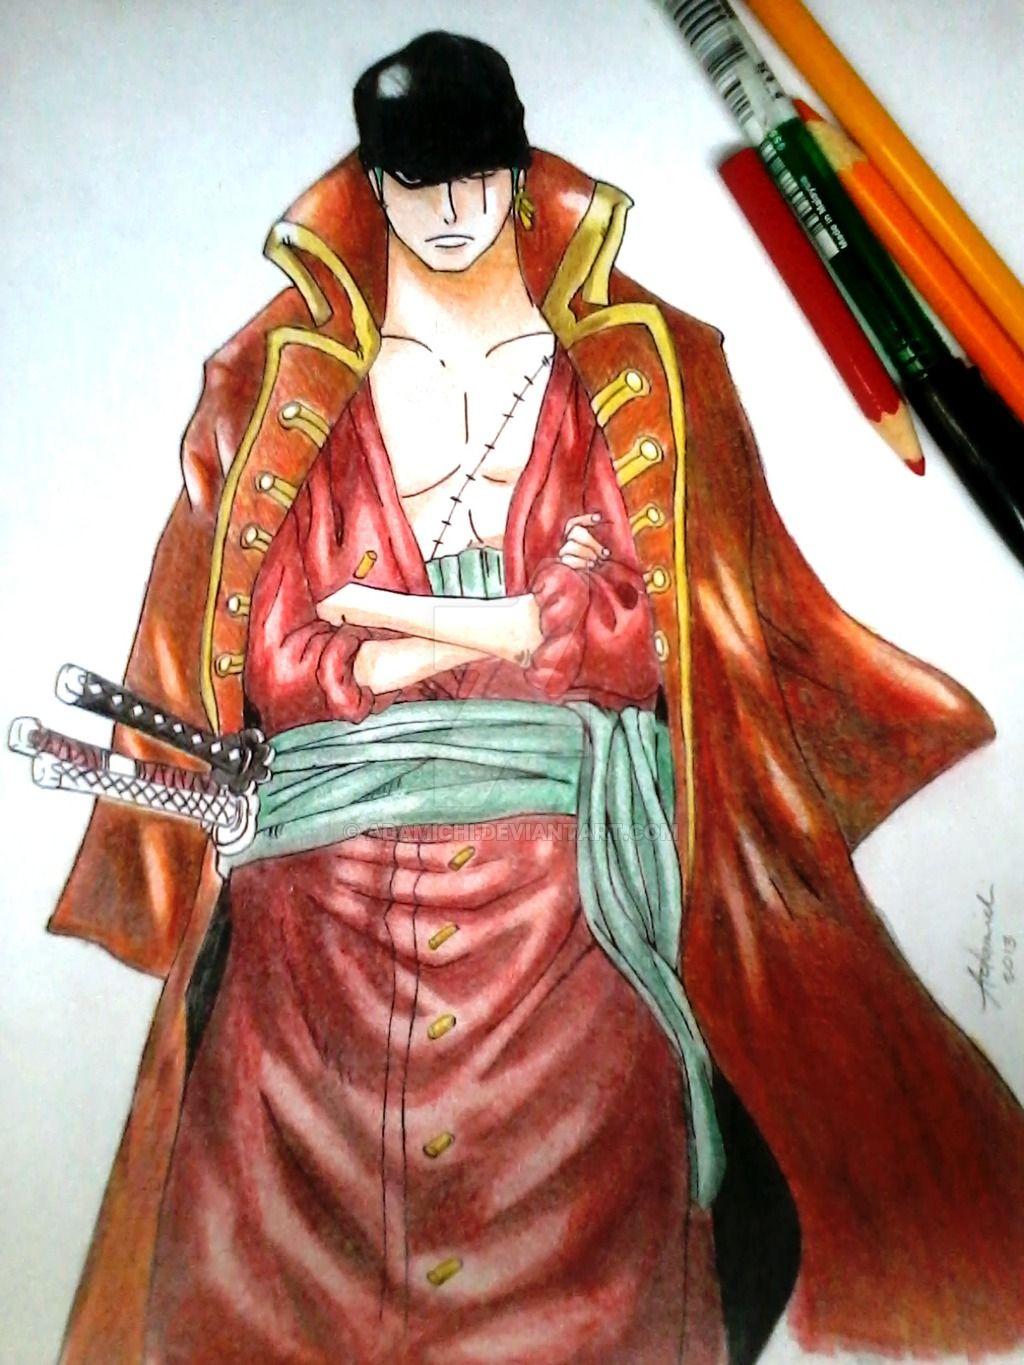 Zoro as depicted from One Piece Film: Z